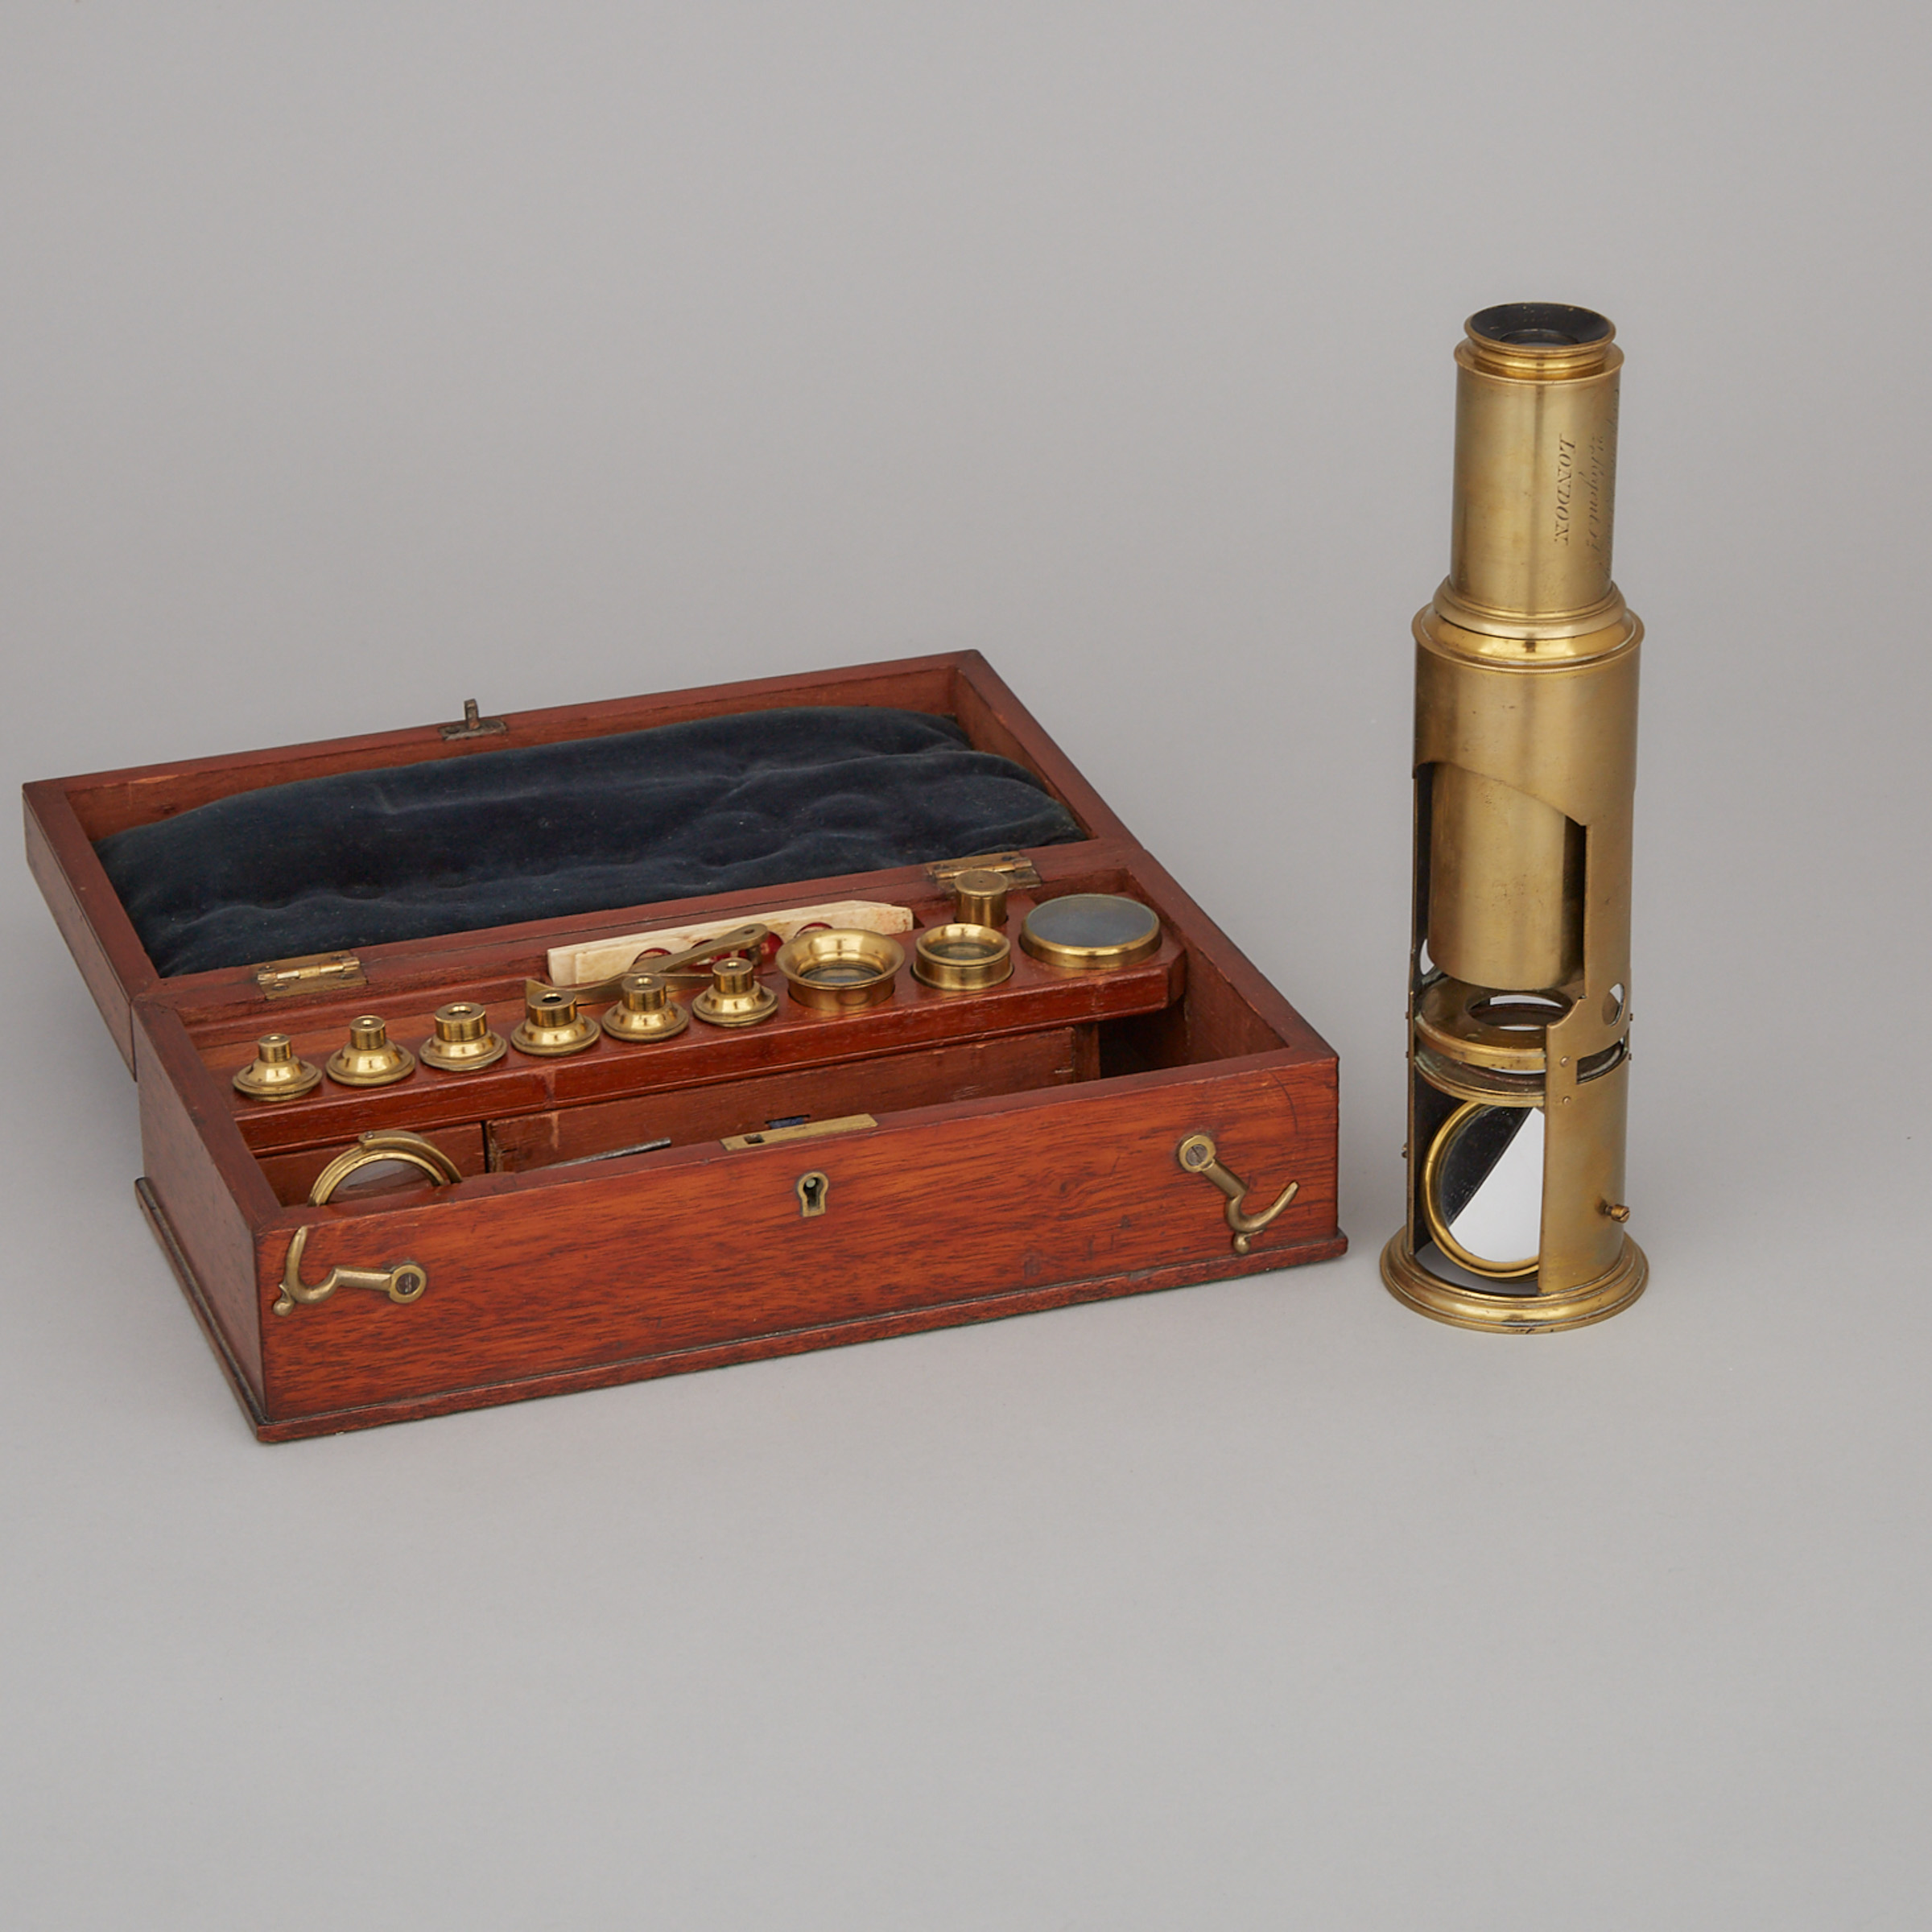 Early Victorian Lacquered Brass Martin Type Drum Microscope, Carpenter & Westley, London, c.1840